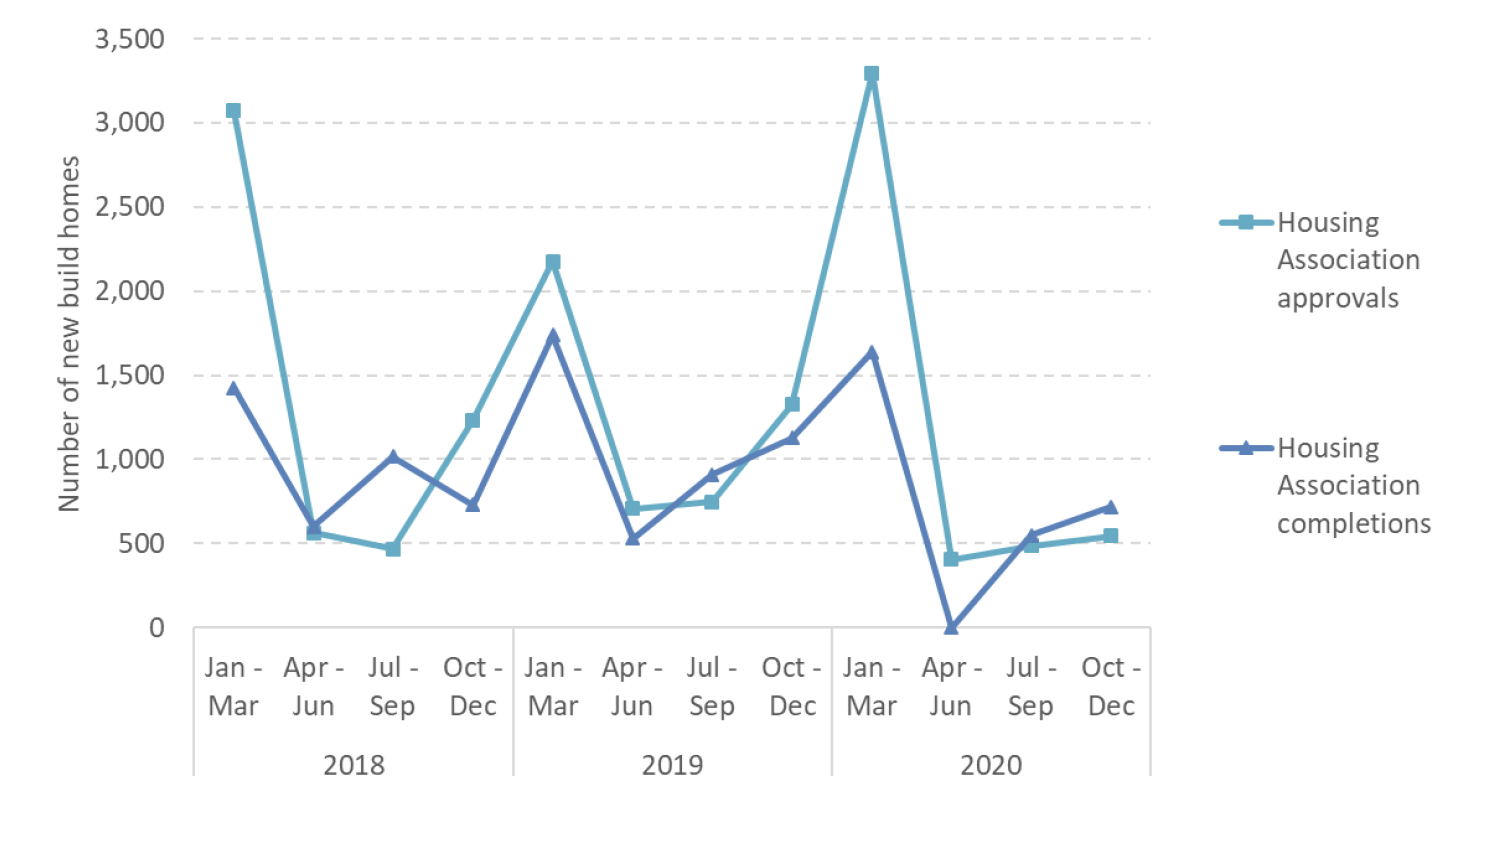 Quarterly housing association new build approvals and completions from 2018 to 2020